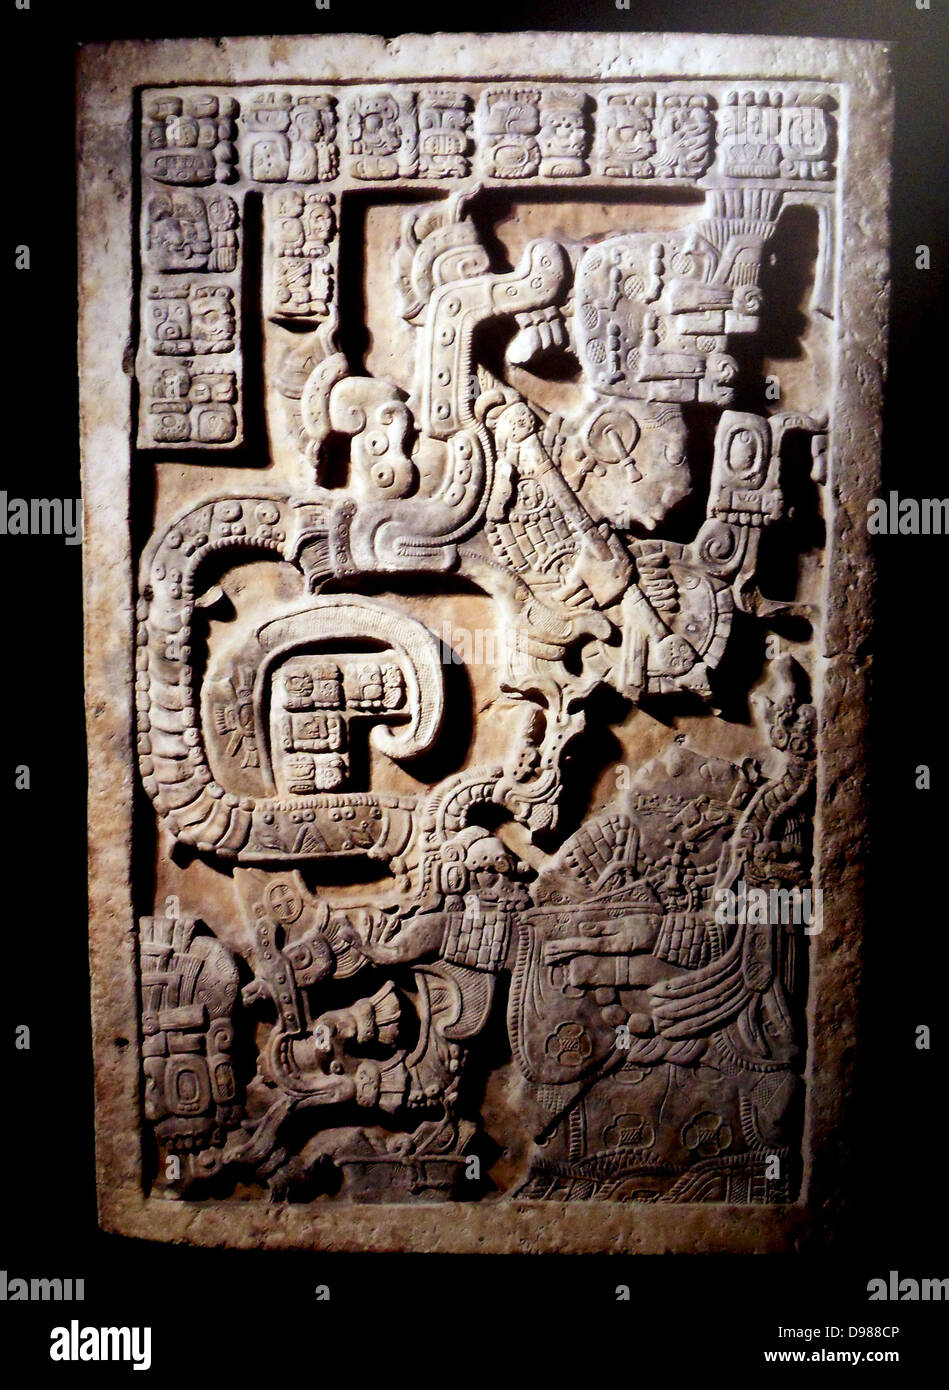 Yaxchilan lintel 15Maya, Late Classic period (AD 600-900)From Yaxchilán, Mexico. A serpent apparition from a Maya temple. Stock Photo